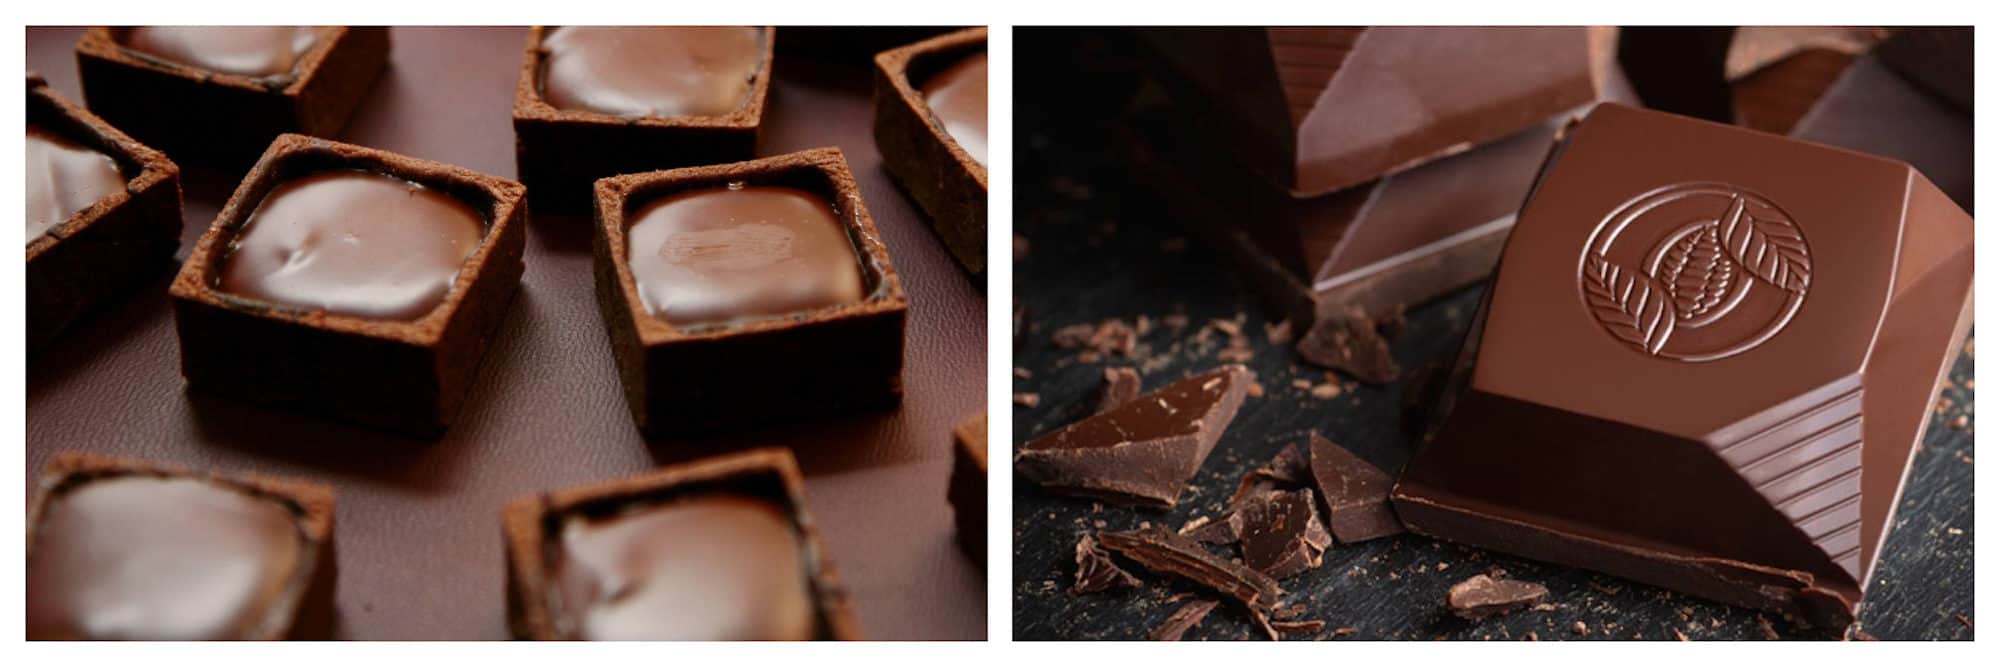 Creamy chocolate squares (left) and milk chocolate (right) at the Salon du Chocolat in Paris in October.